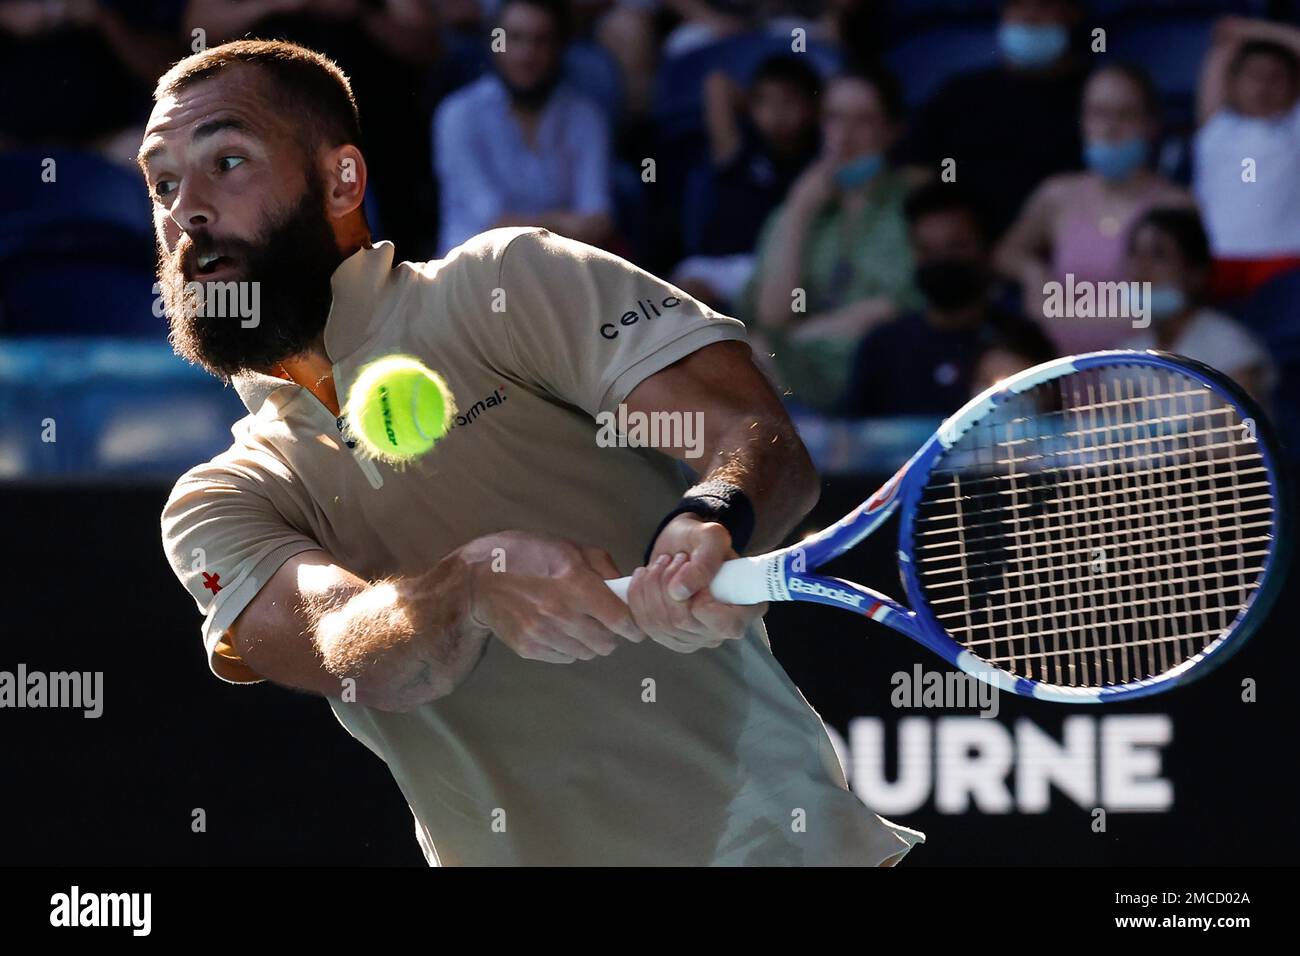 Benoit Paire of France plays a backhand return to Stefanos Tsitsipas of Greece during their third round match at the Australian Open tennis championships in Melbourne, Australia, Saturday, Jan